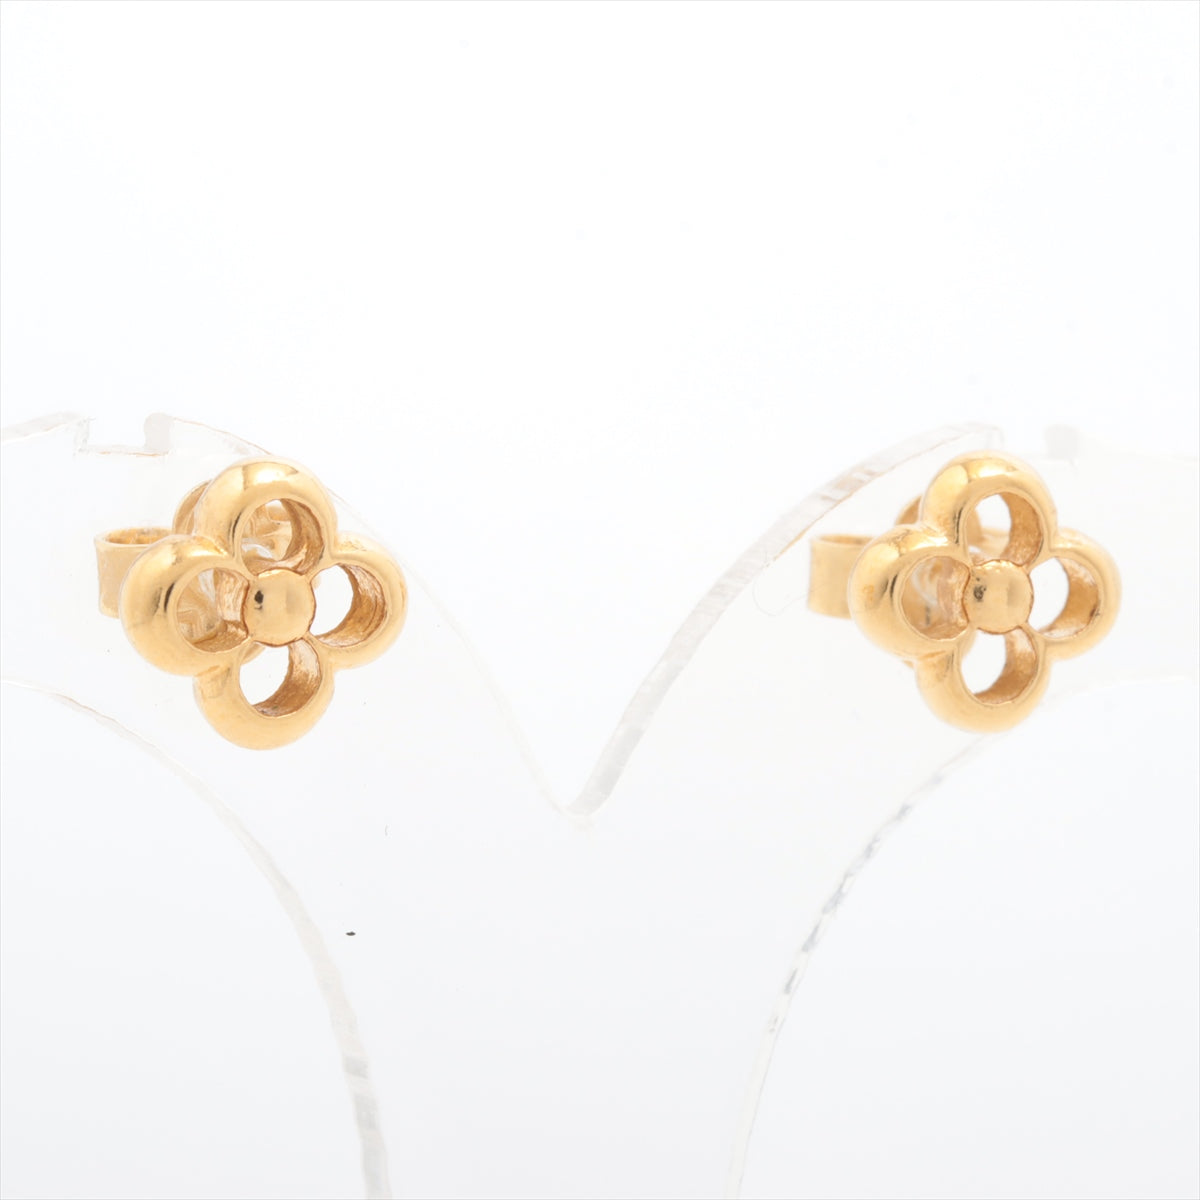 Louis Vuitton M68131 Flower Full Piercing jewelry (for both ears) GP Gold